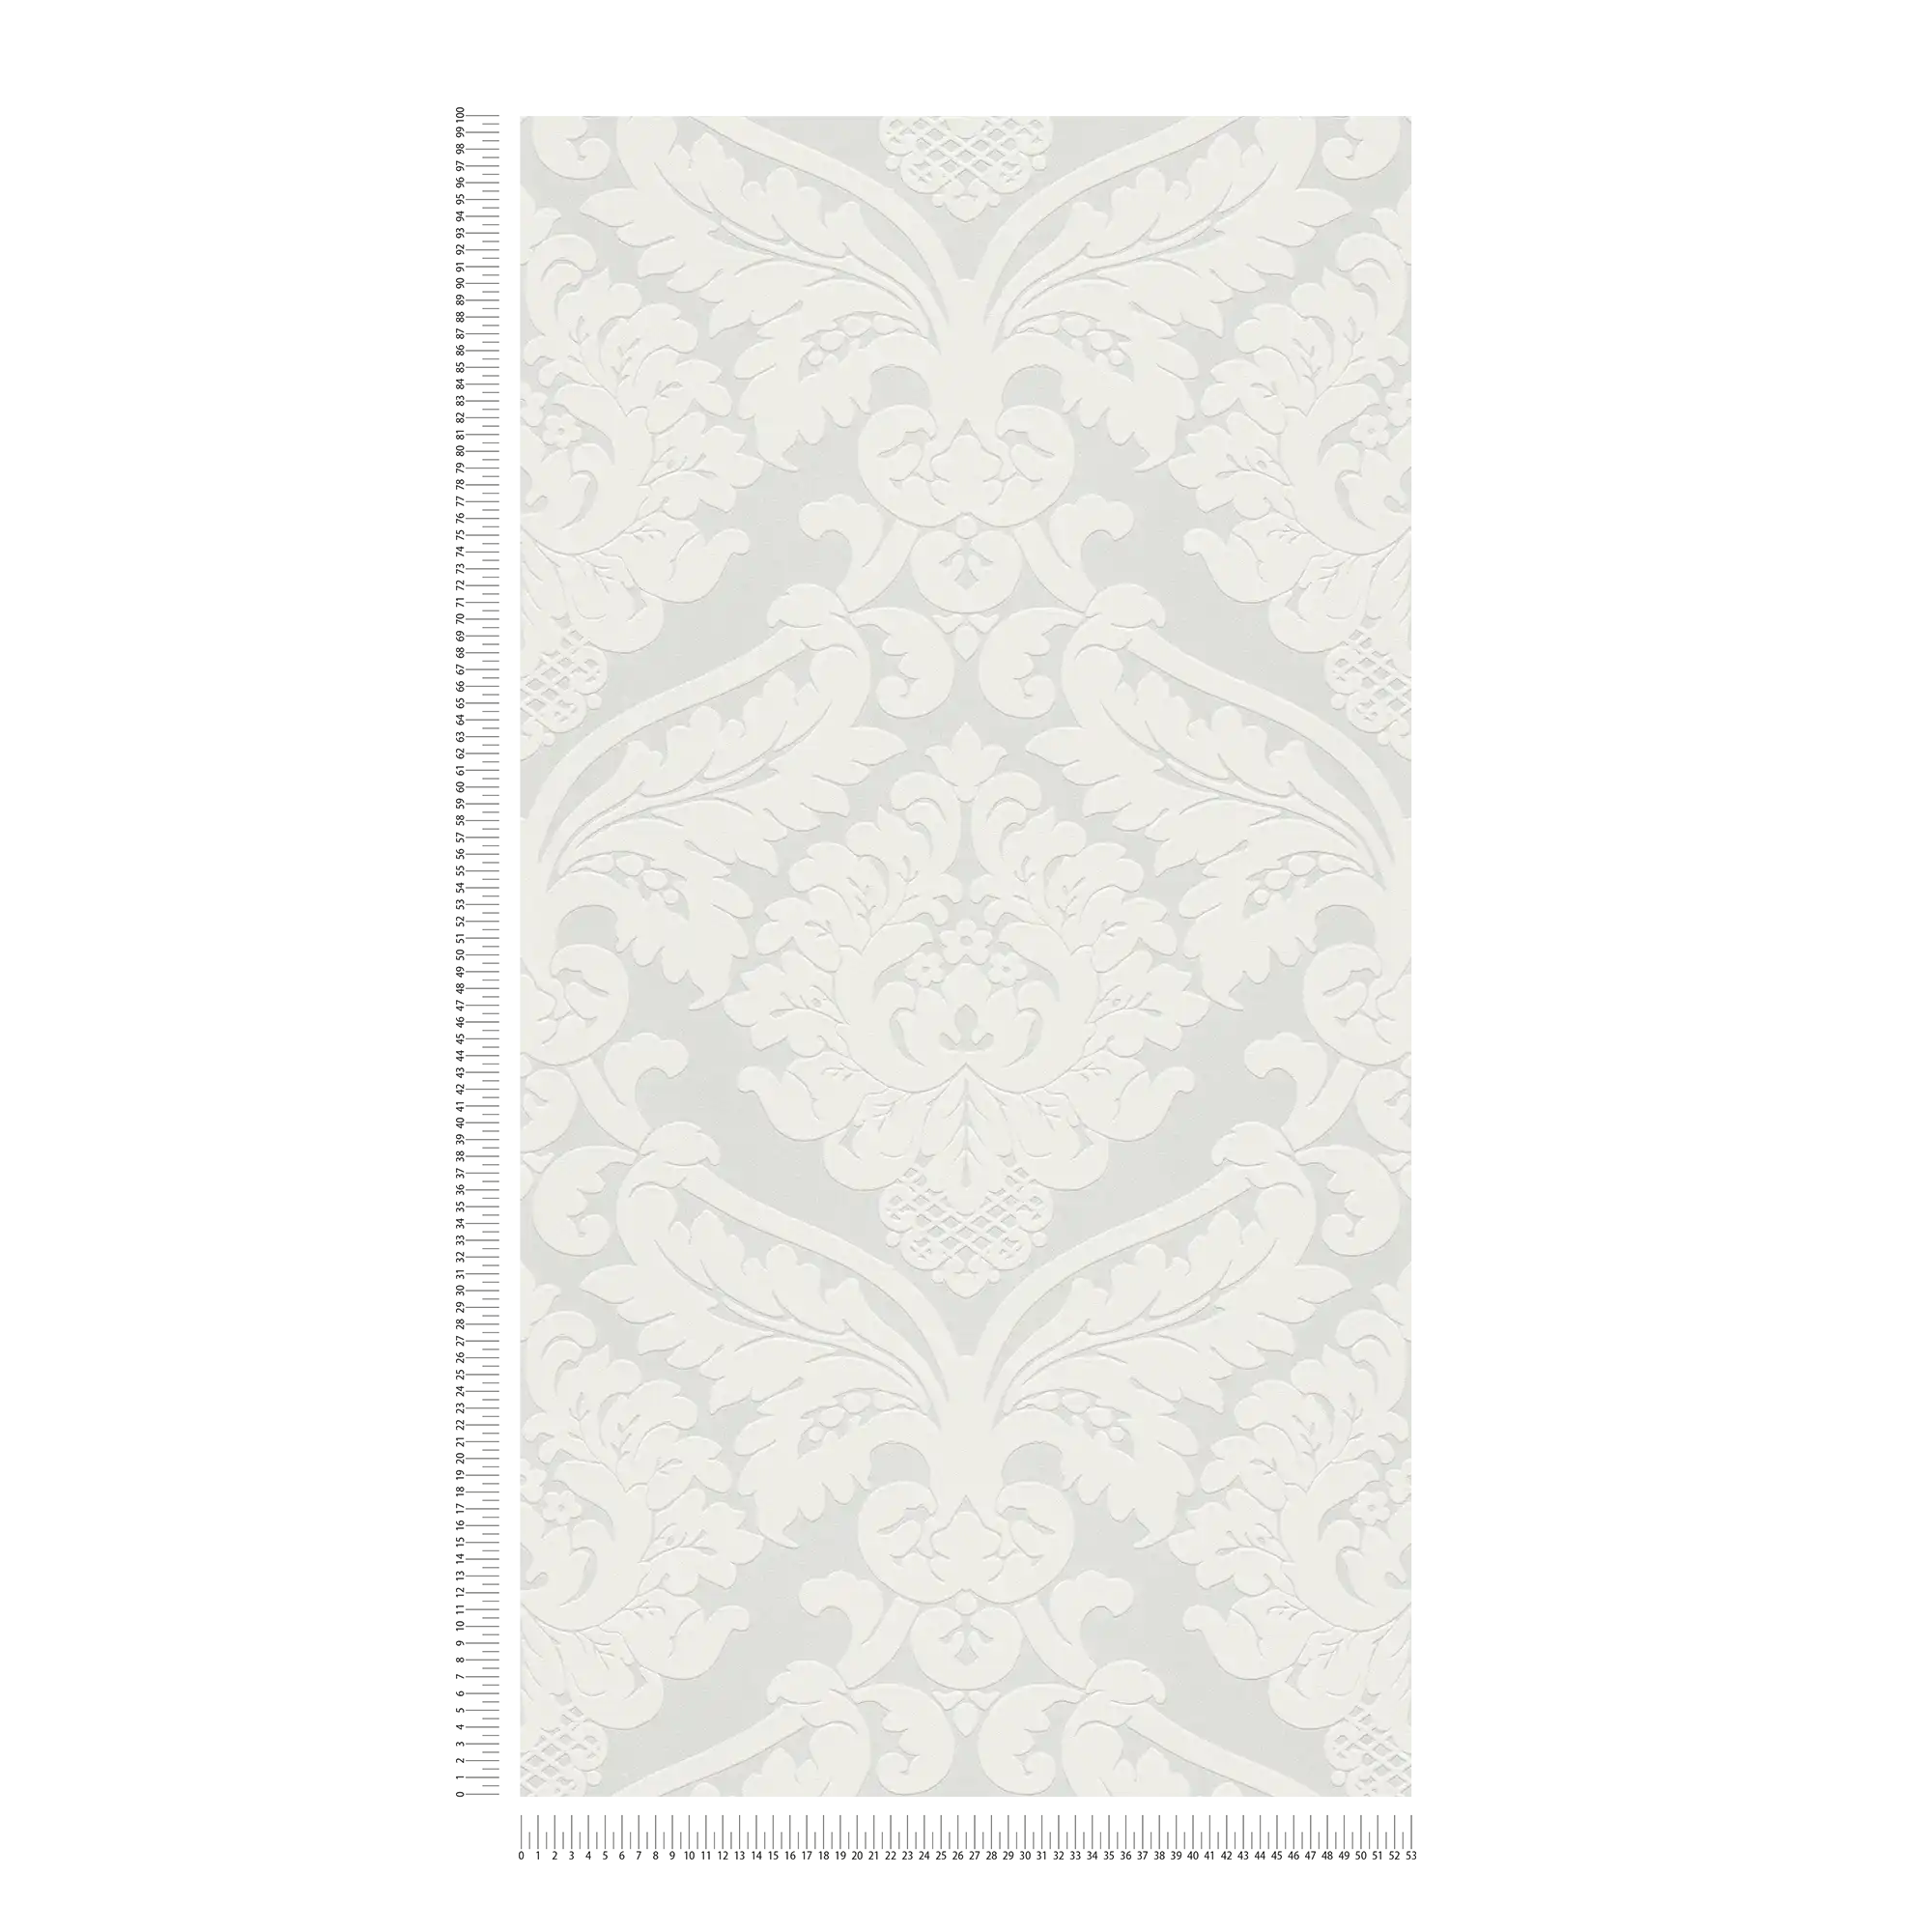             Baroque wallpaper with 3D floral ornament - metallic, white
        